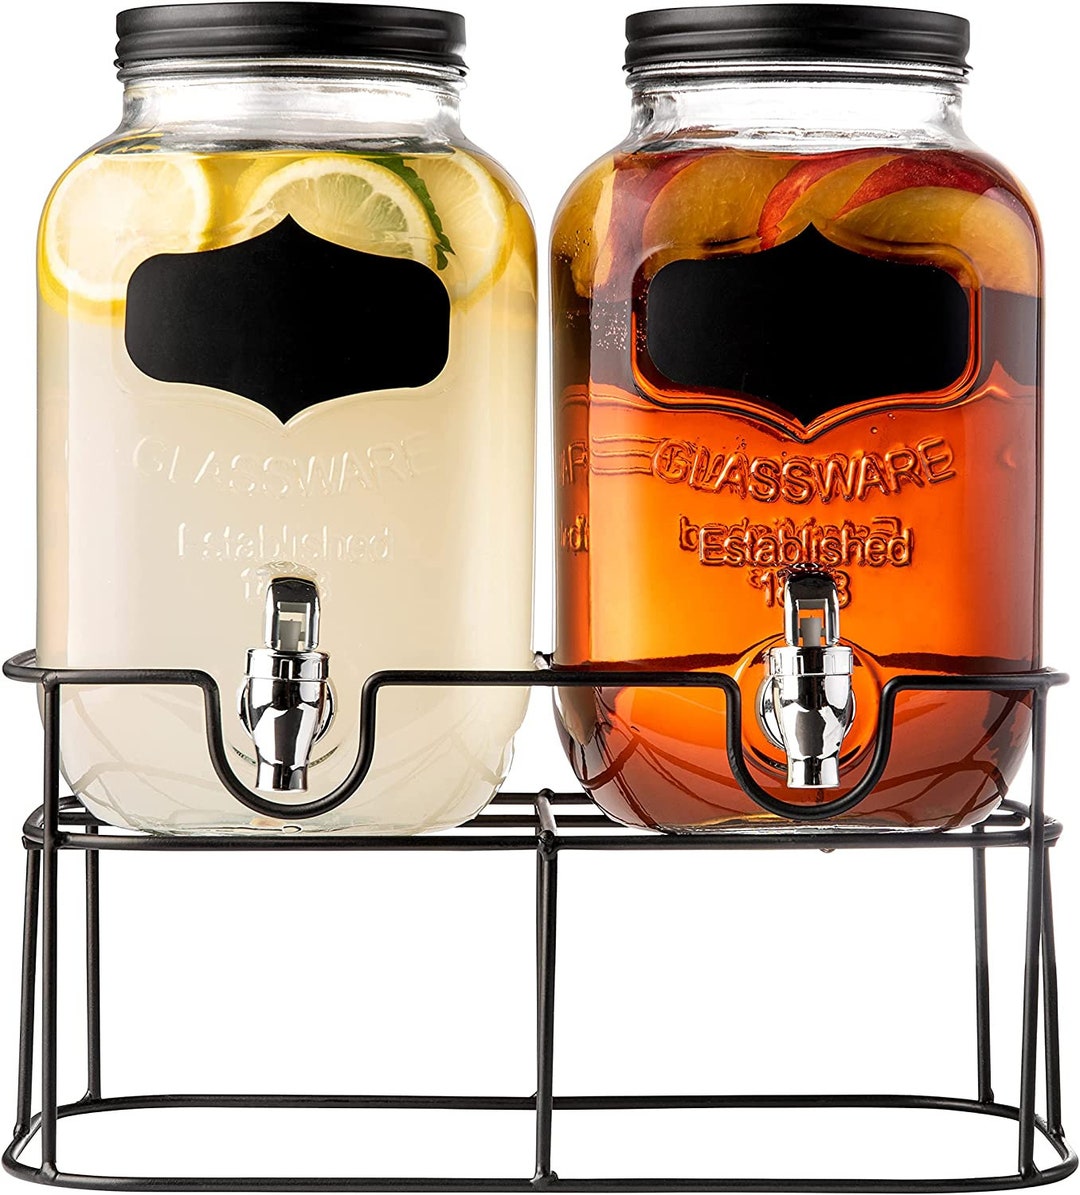 Beverage Dispenser with Stand for Parties - Two 1 Gallon Glass Mason Jar  Drink Dispensers with Stand for Water, Lemonade, Punch, Juice or Adult